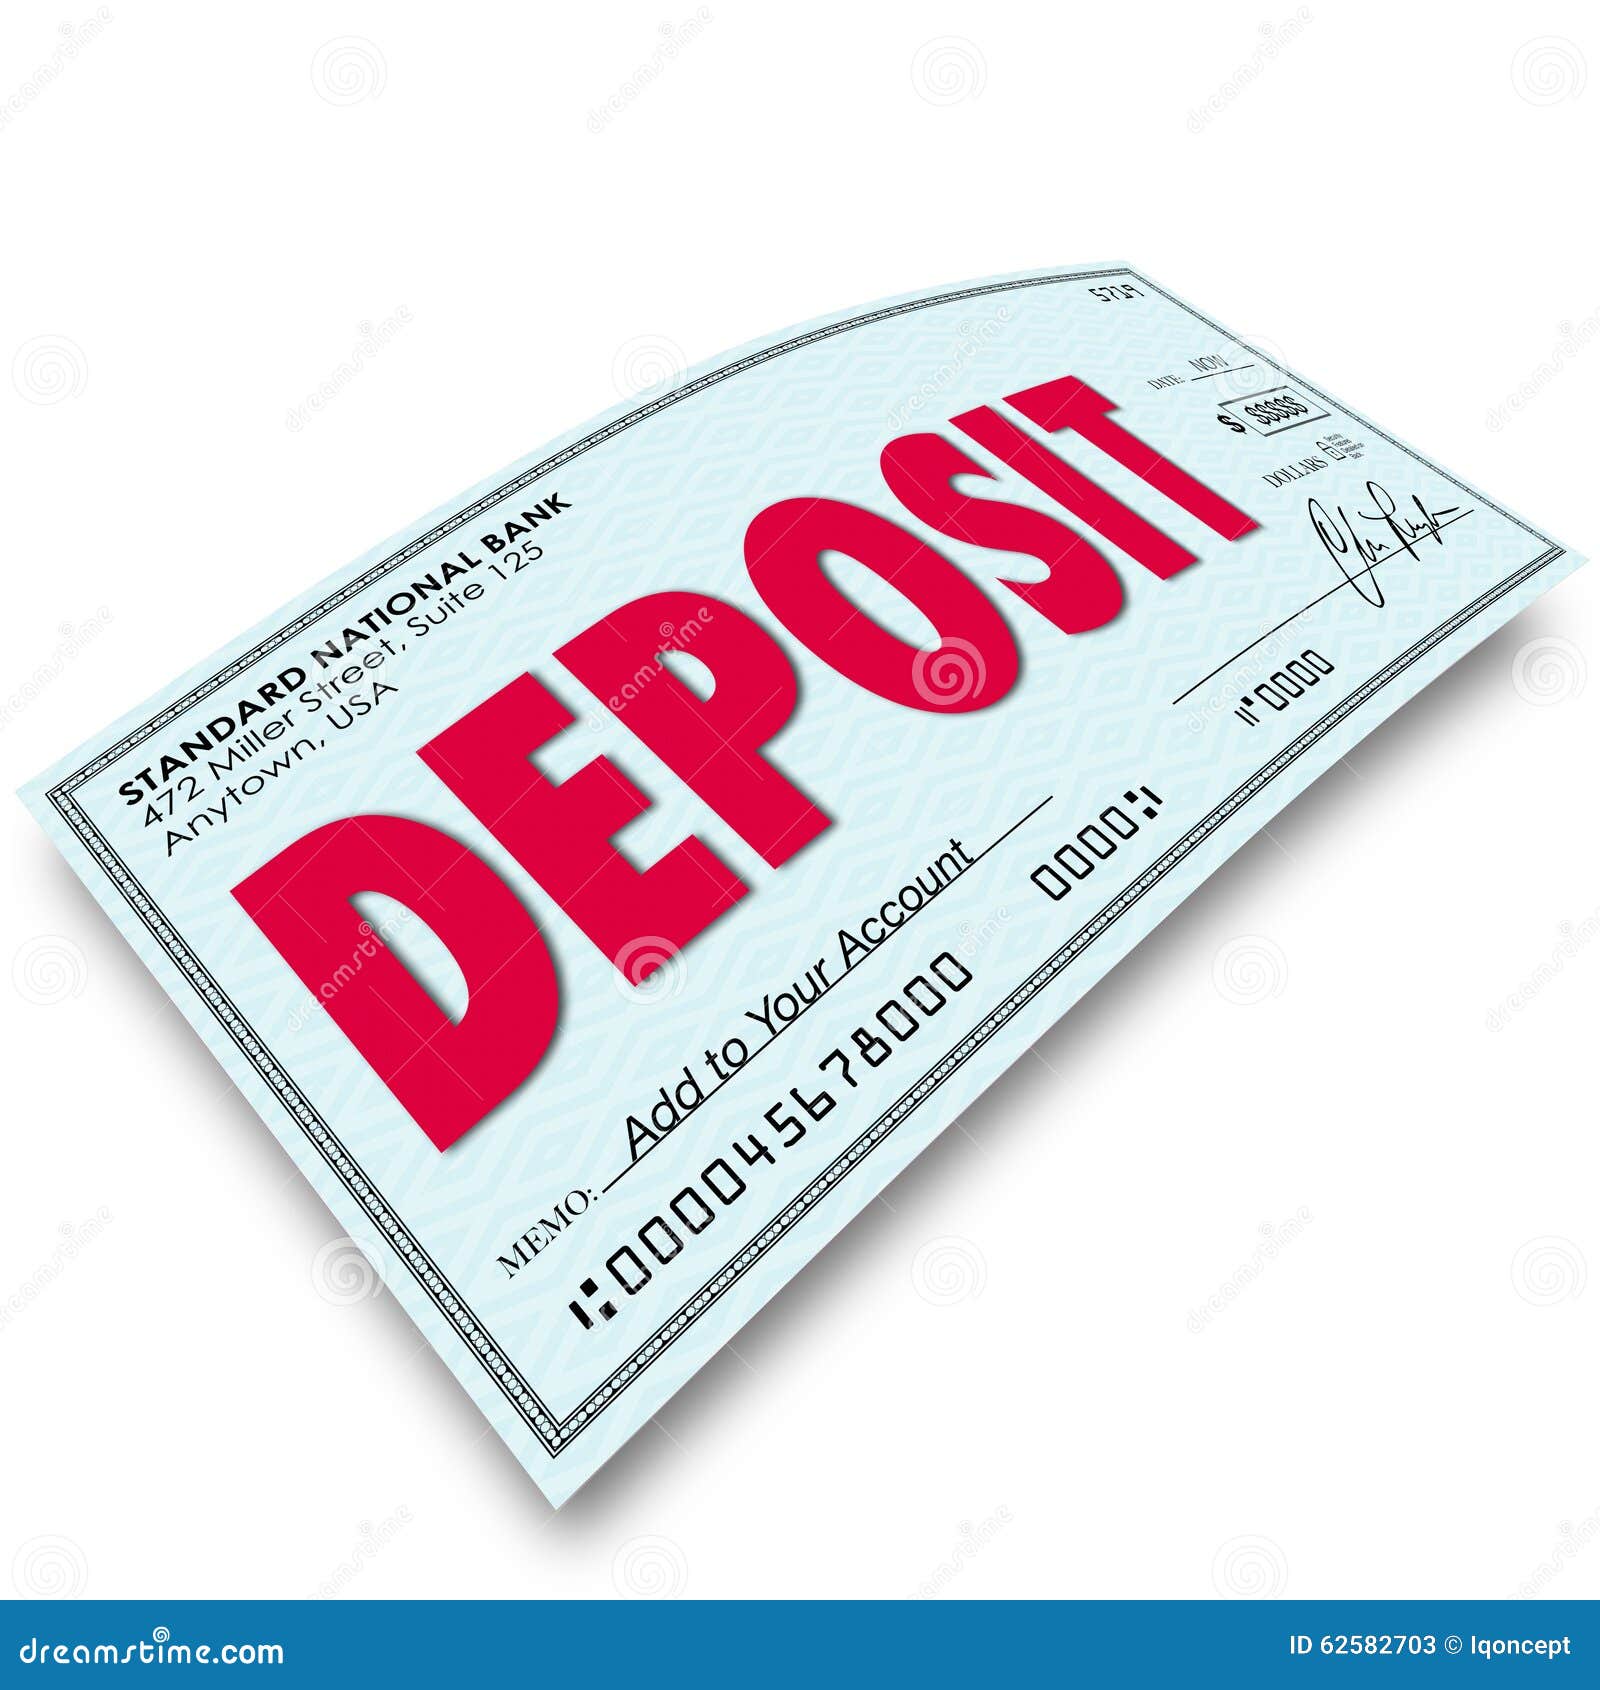 deposit word check putting money into your bank account